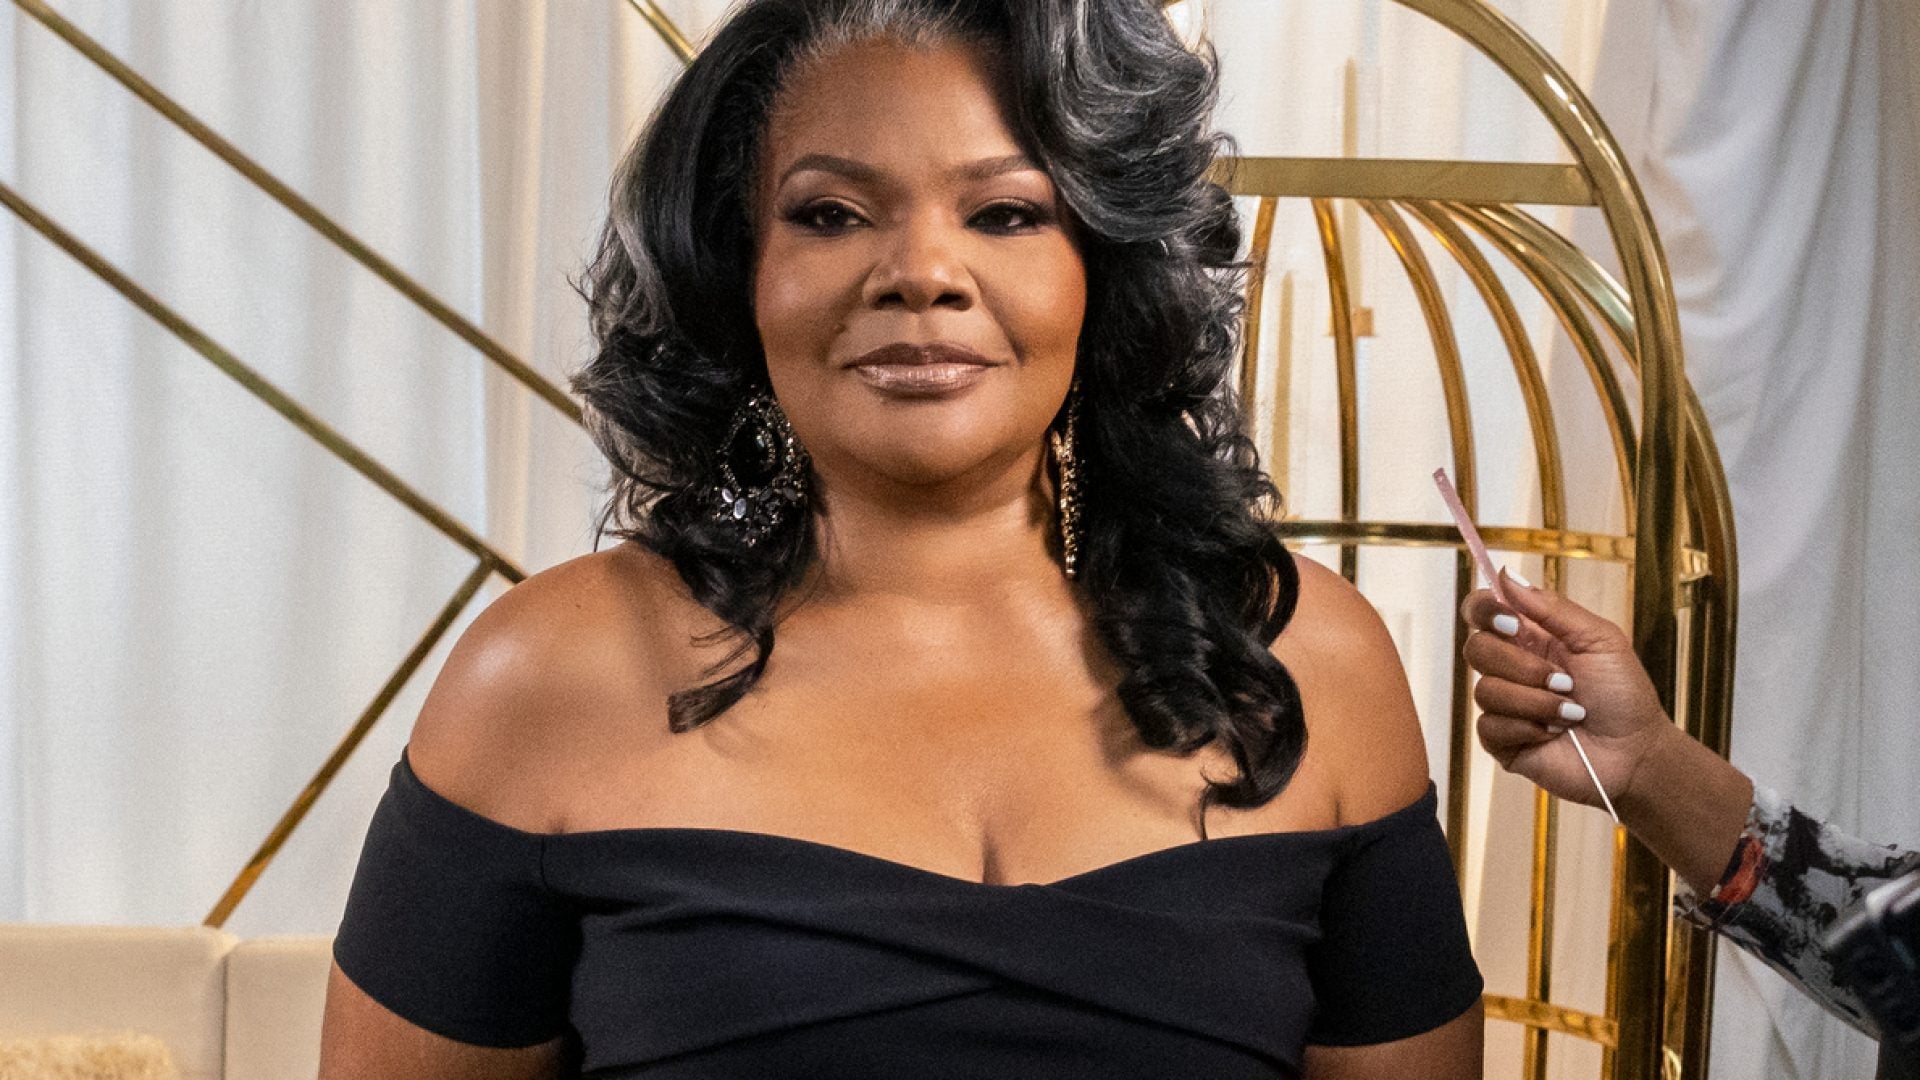 Mo'Nique Opens Up On Her 13-Year Feud With Lee Daniels And Her New 'Chapter Of Forgiveness'